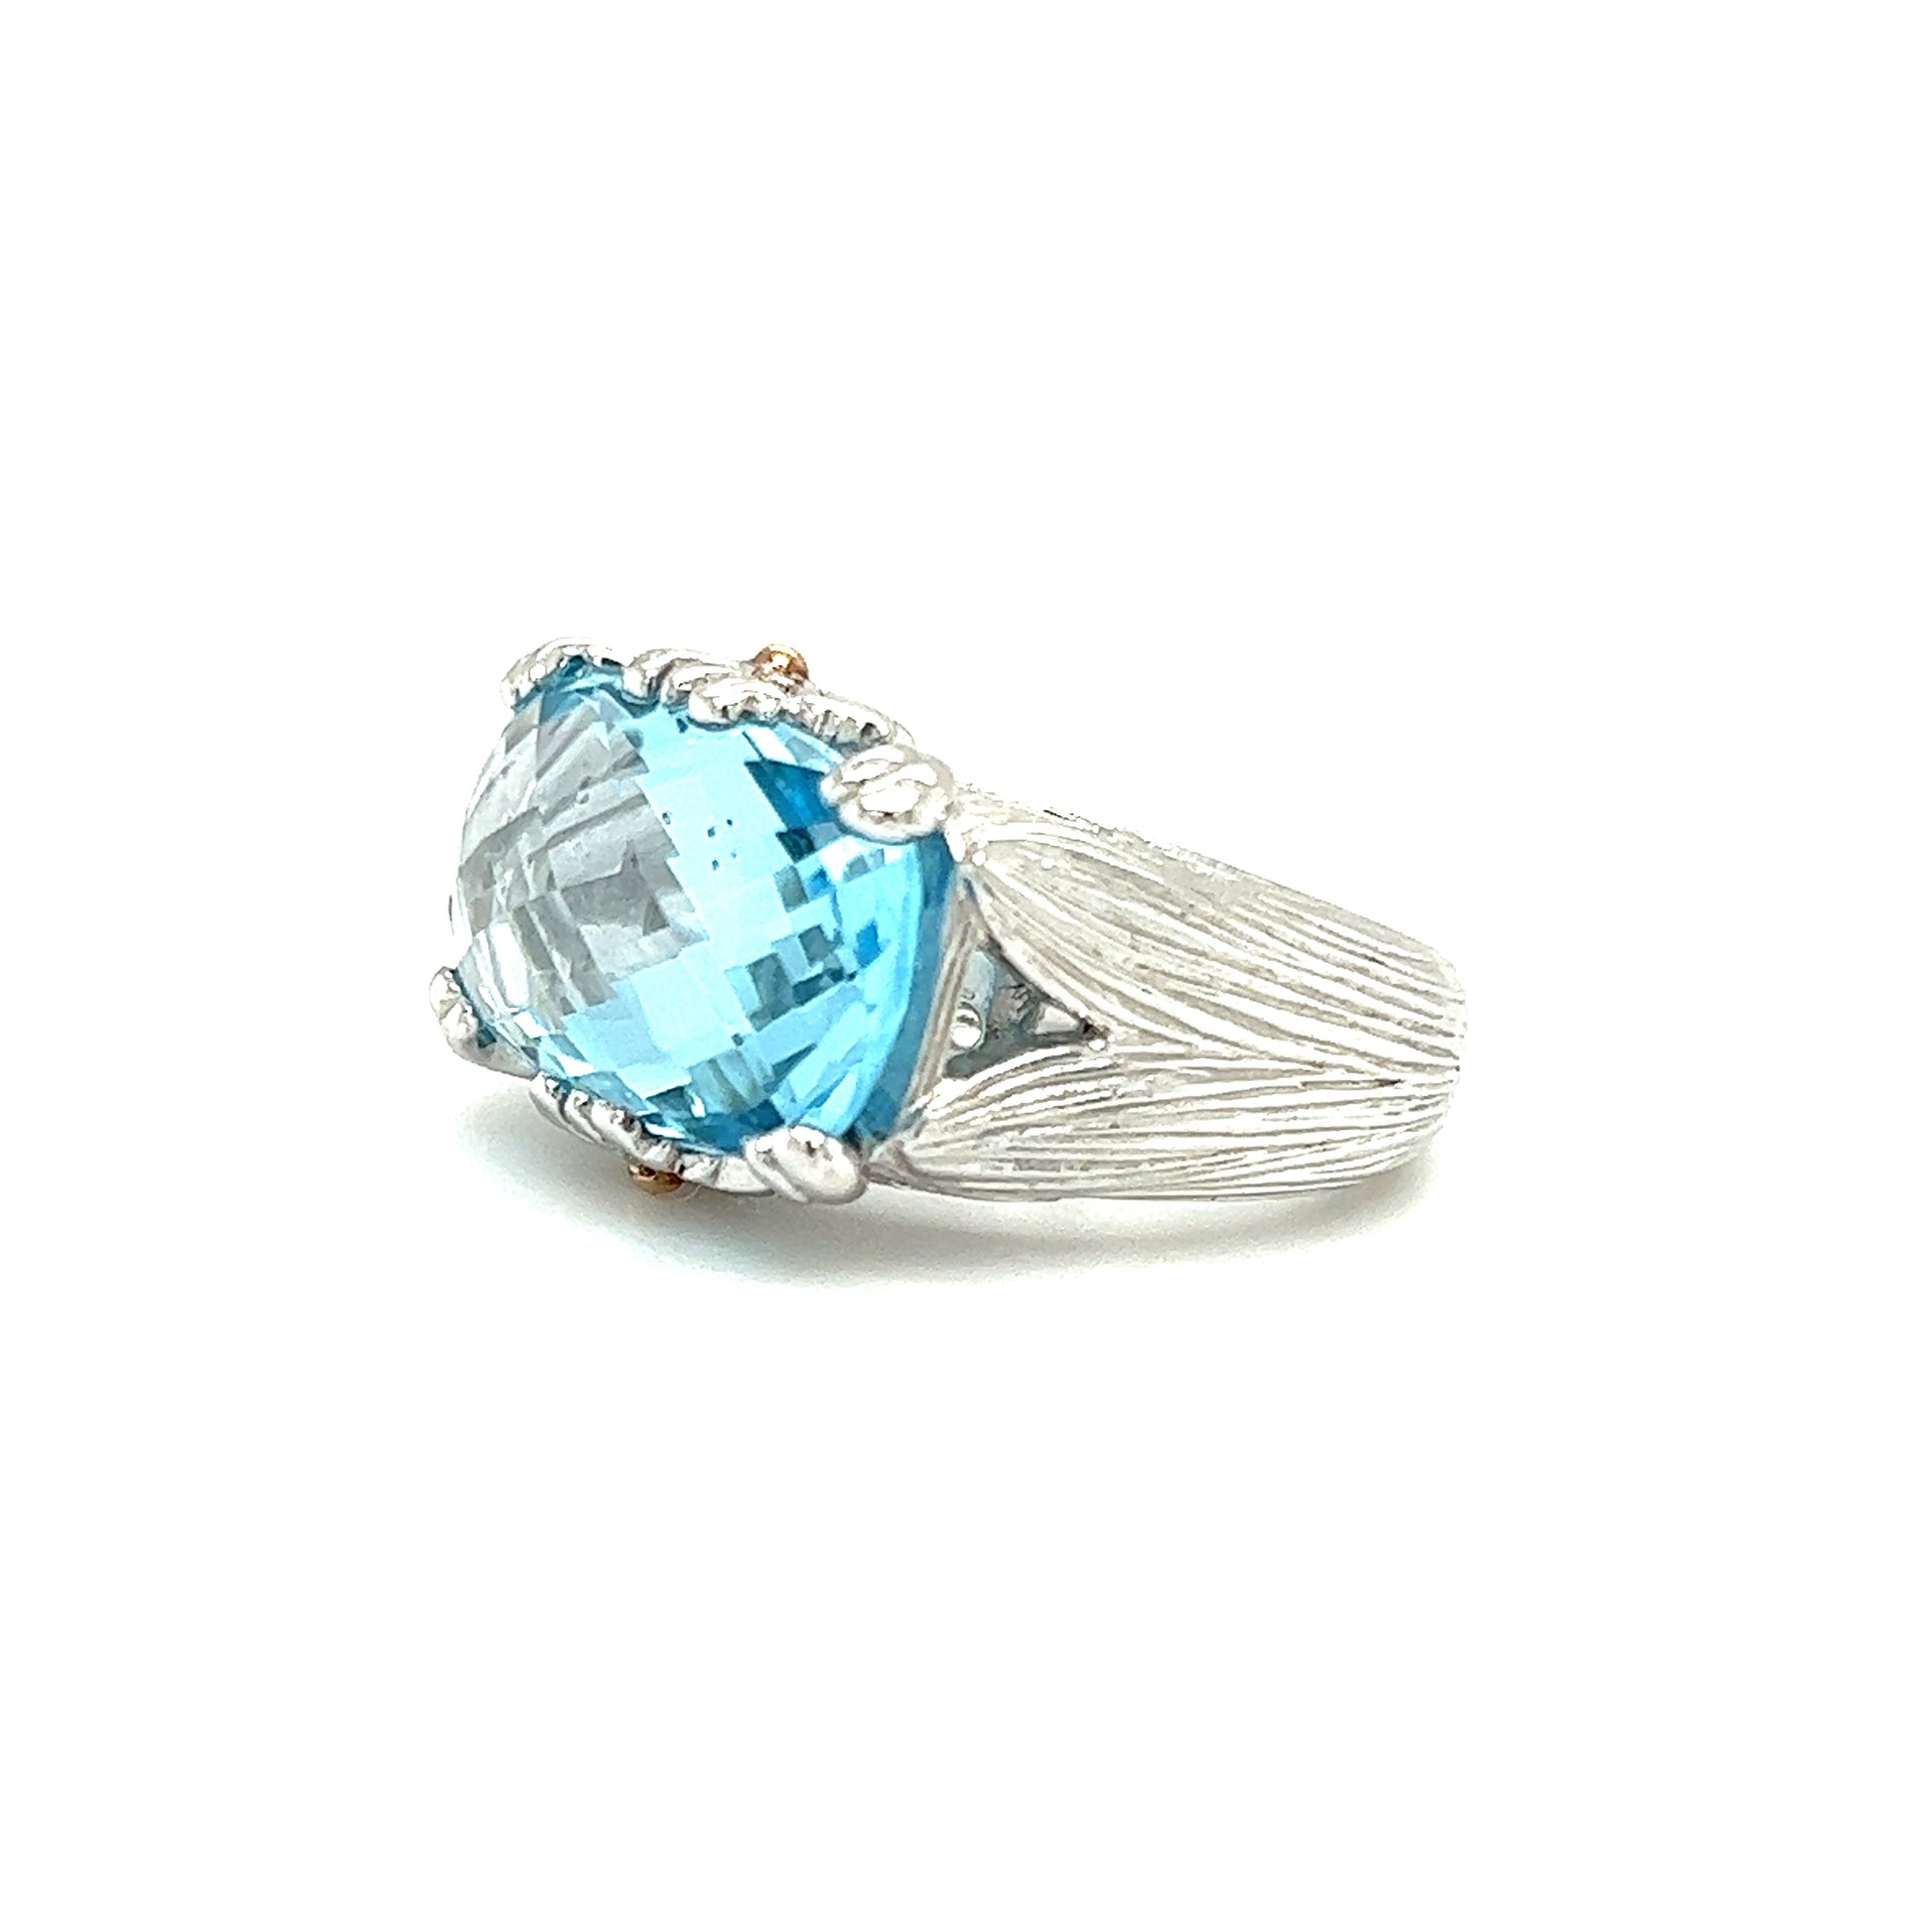 Elongated Cushion Blue Topaz Ring with 18K Yellow Gold Accents in Sterling Silver Right Side View